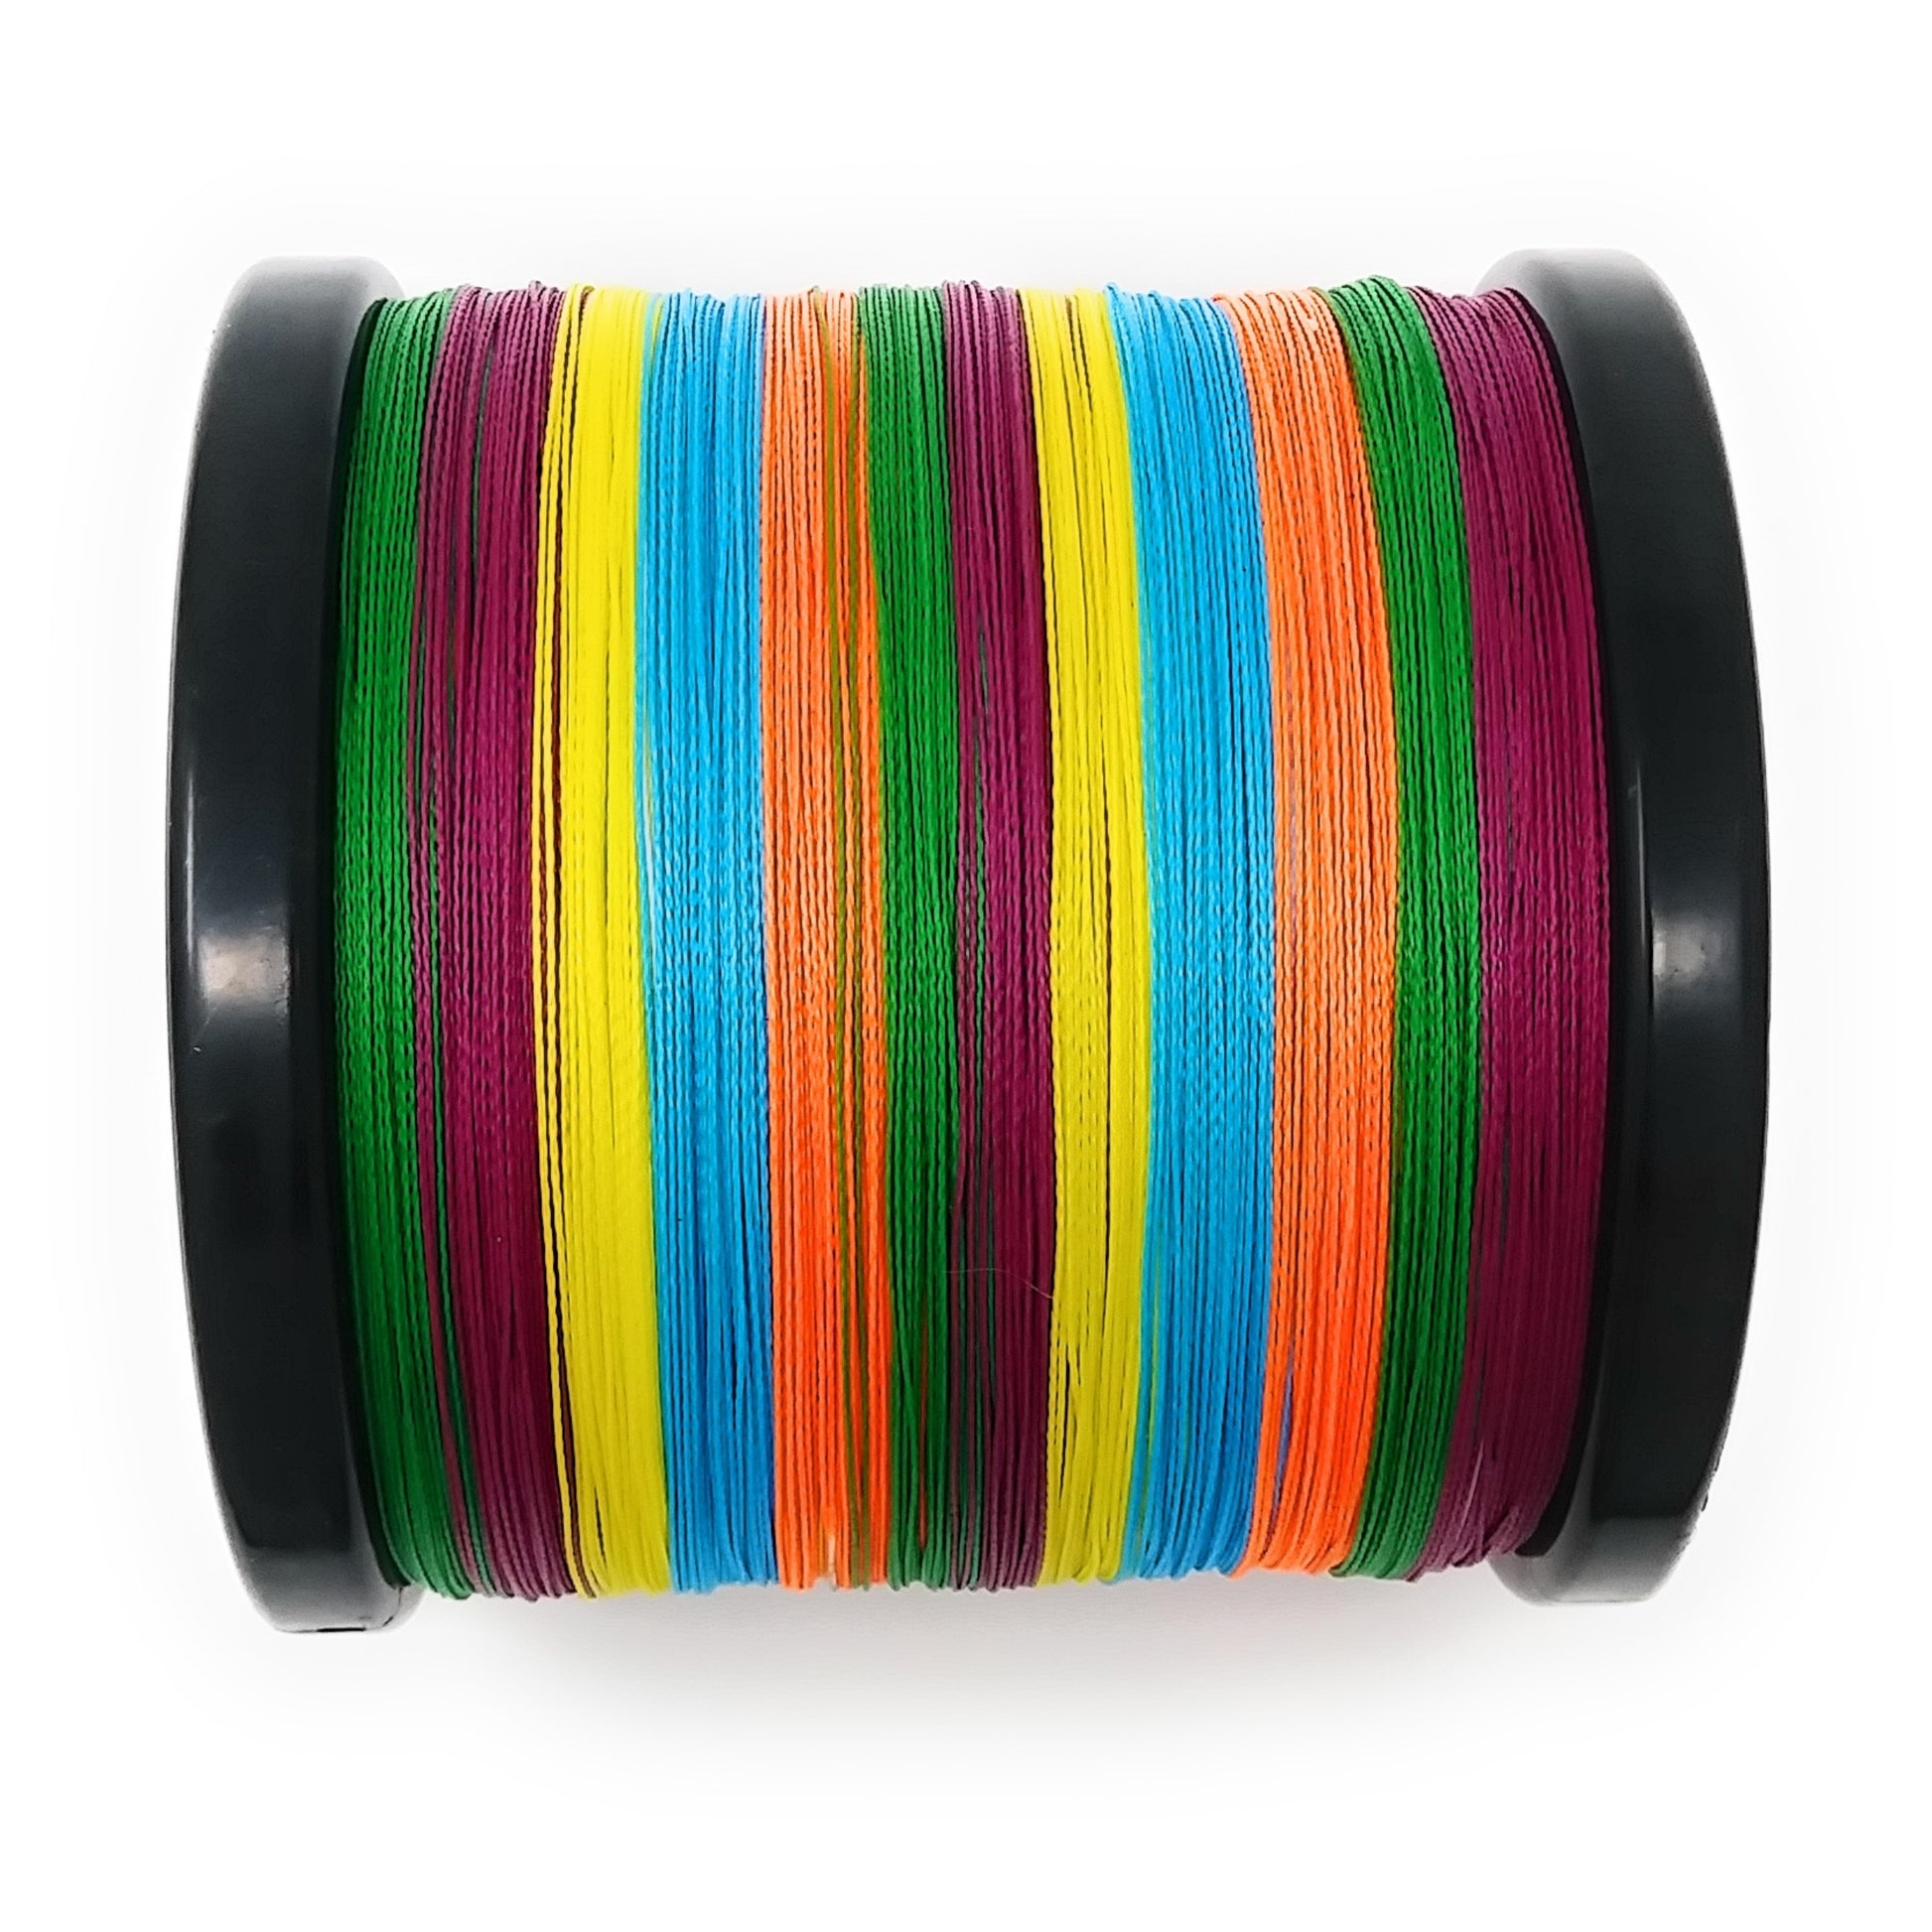 Reaction Tackle Braided Fishing Line - Pro Grade Power Performance for  Saltwater or Freshwater Fish - Colored Fishing Line Braid for Extra  Visibility